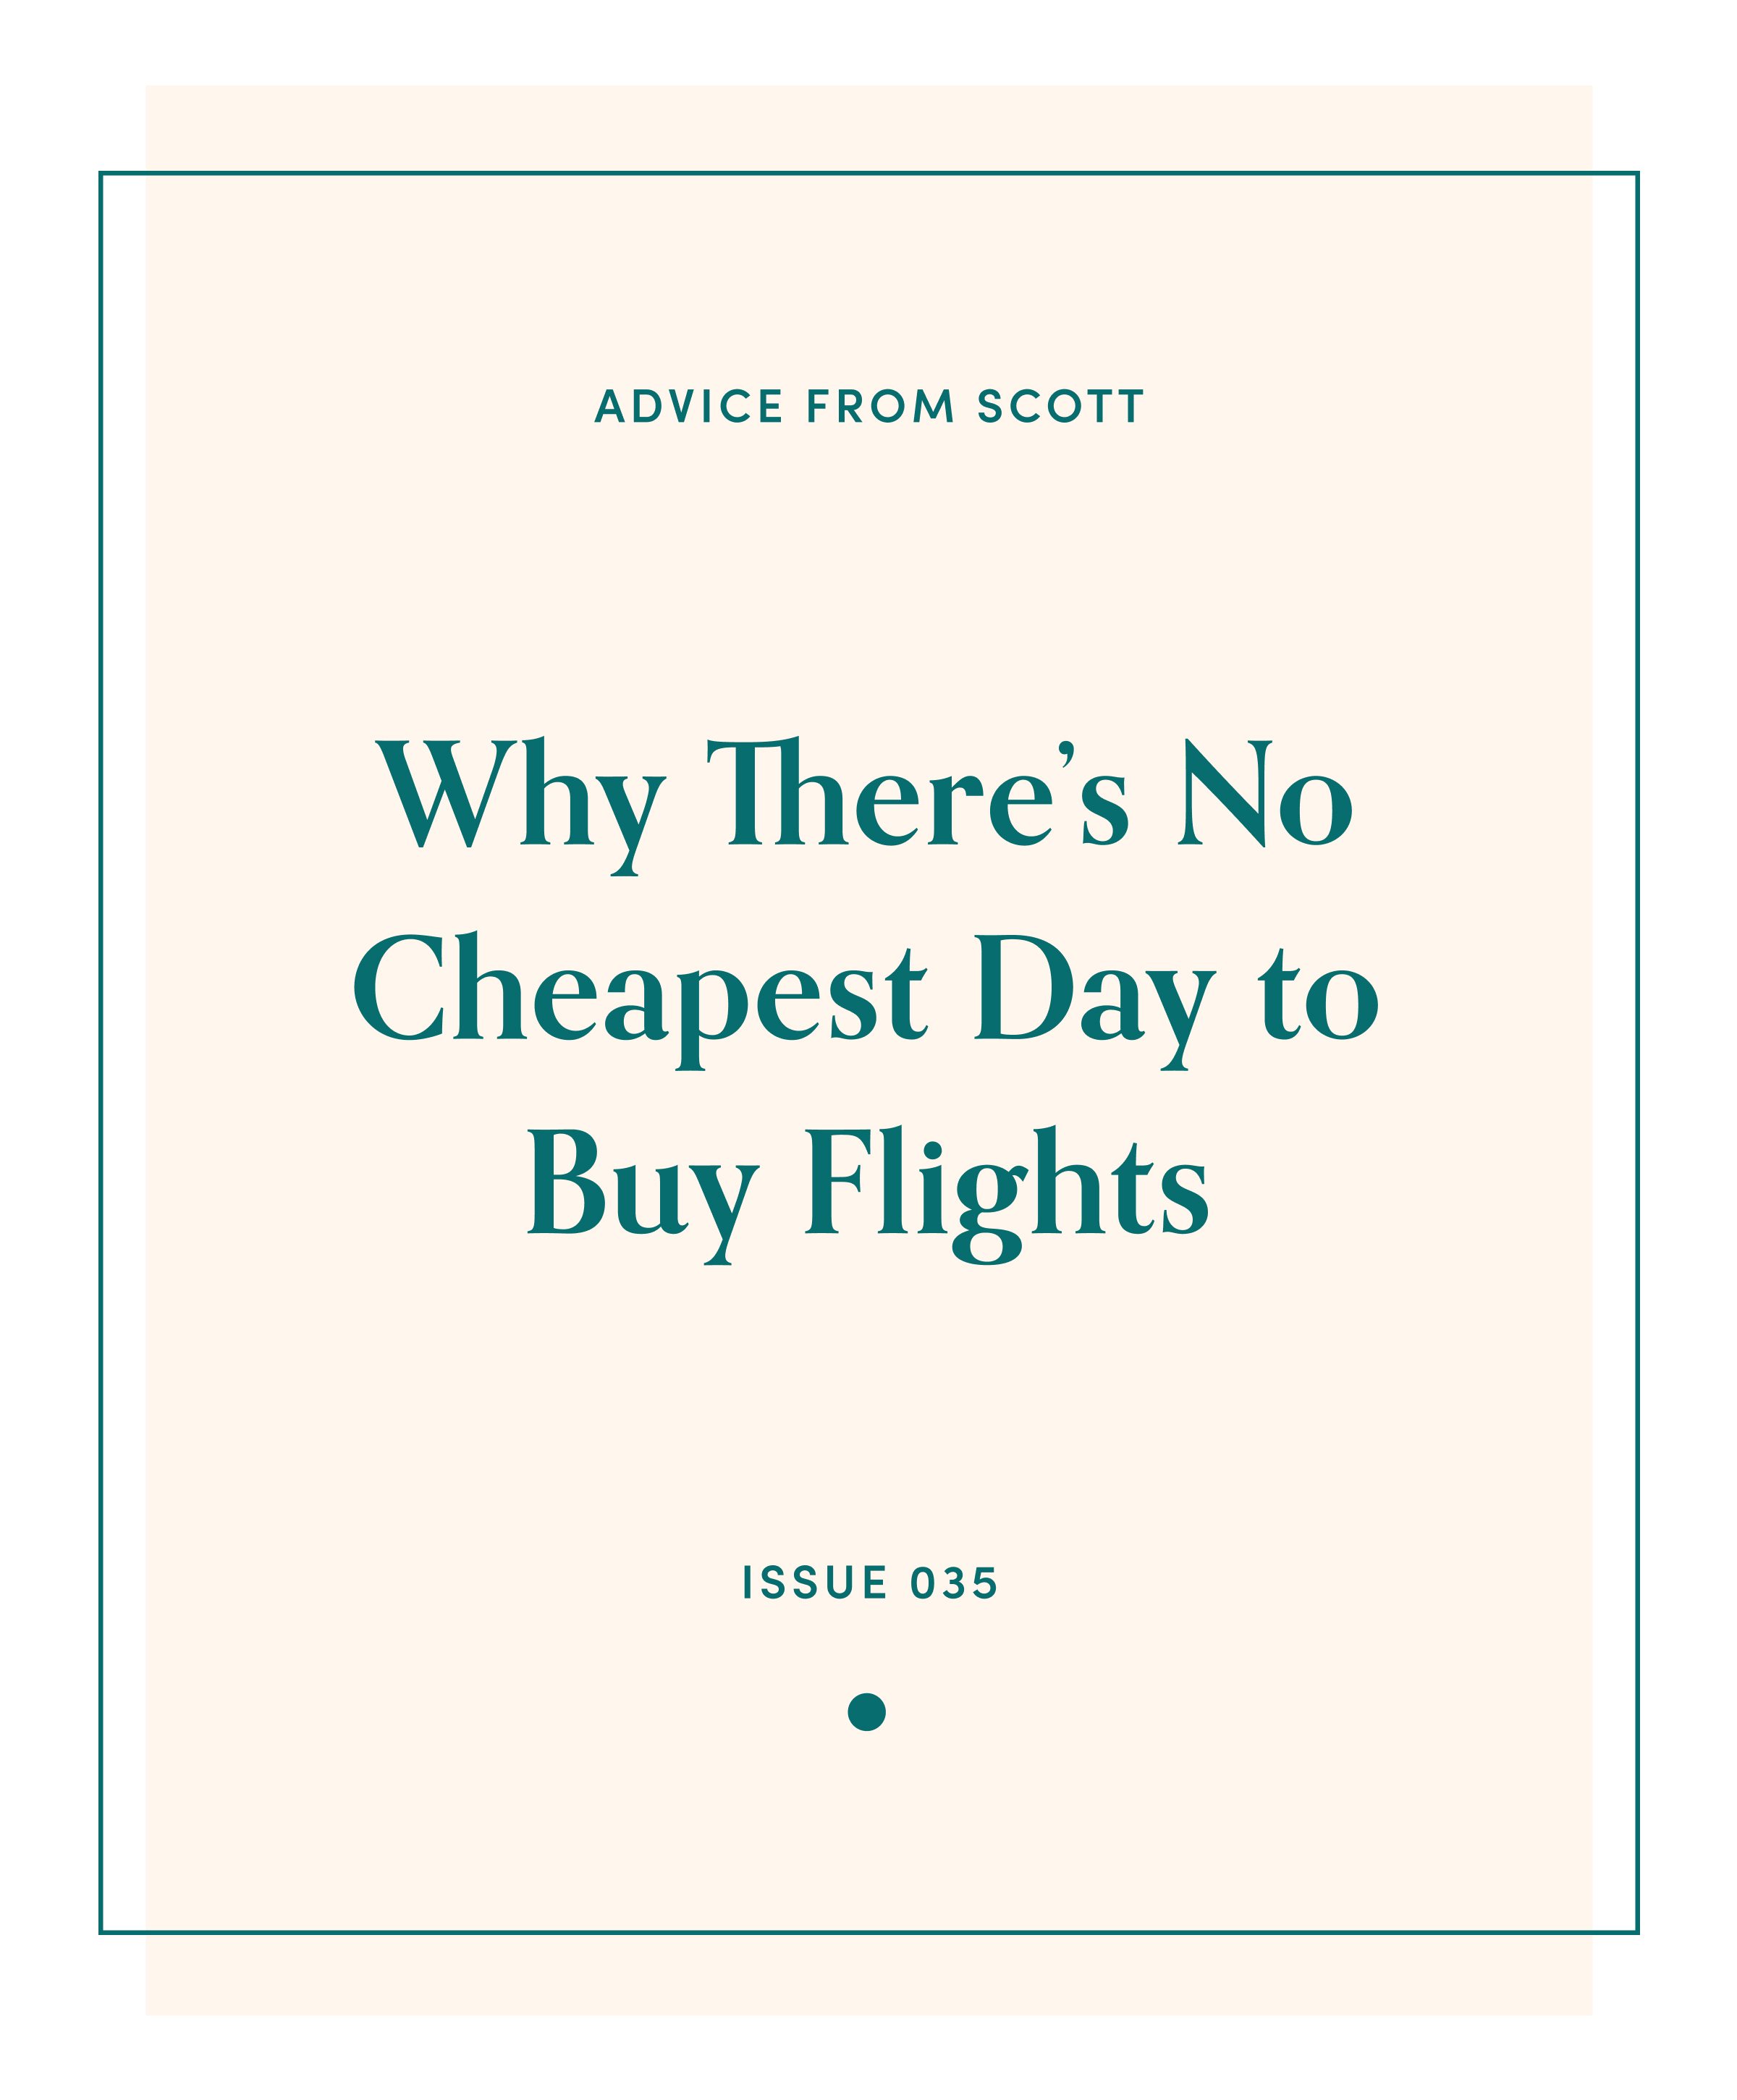 Issue 35, Why there's no cheapest day to buy flights.